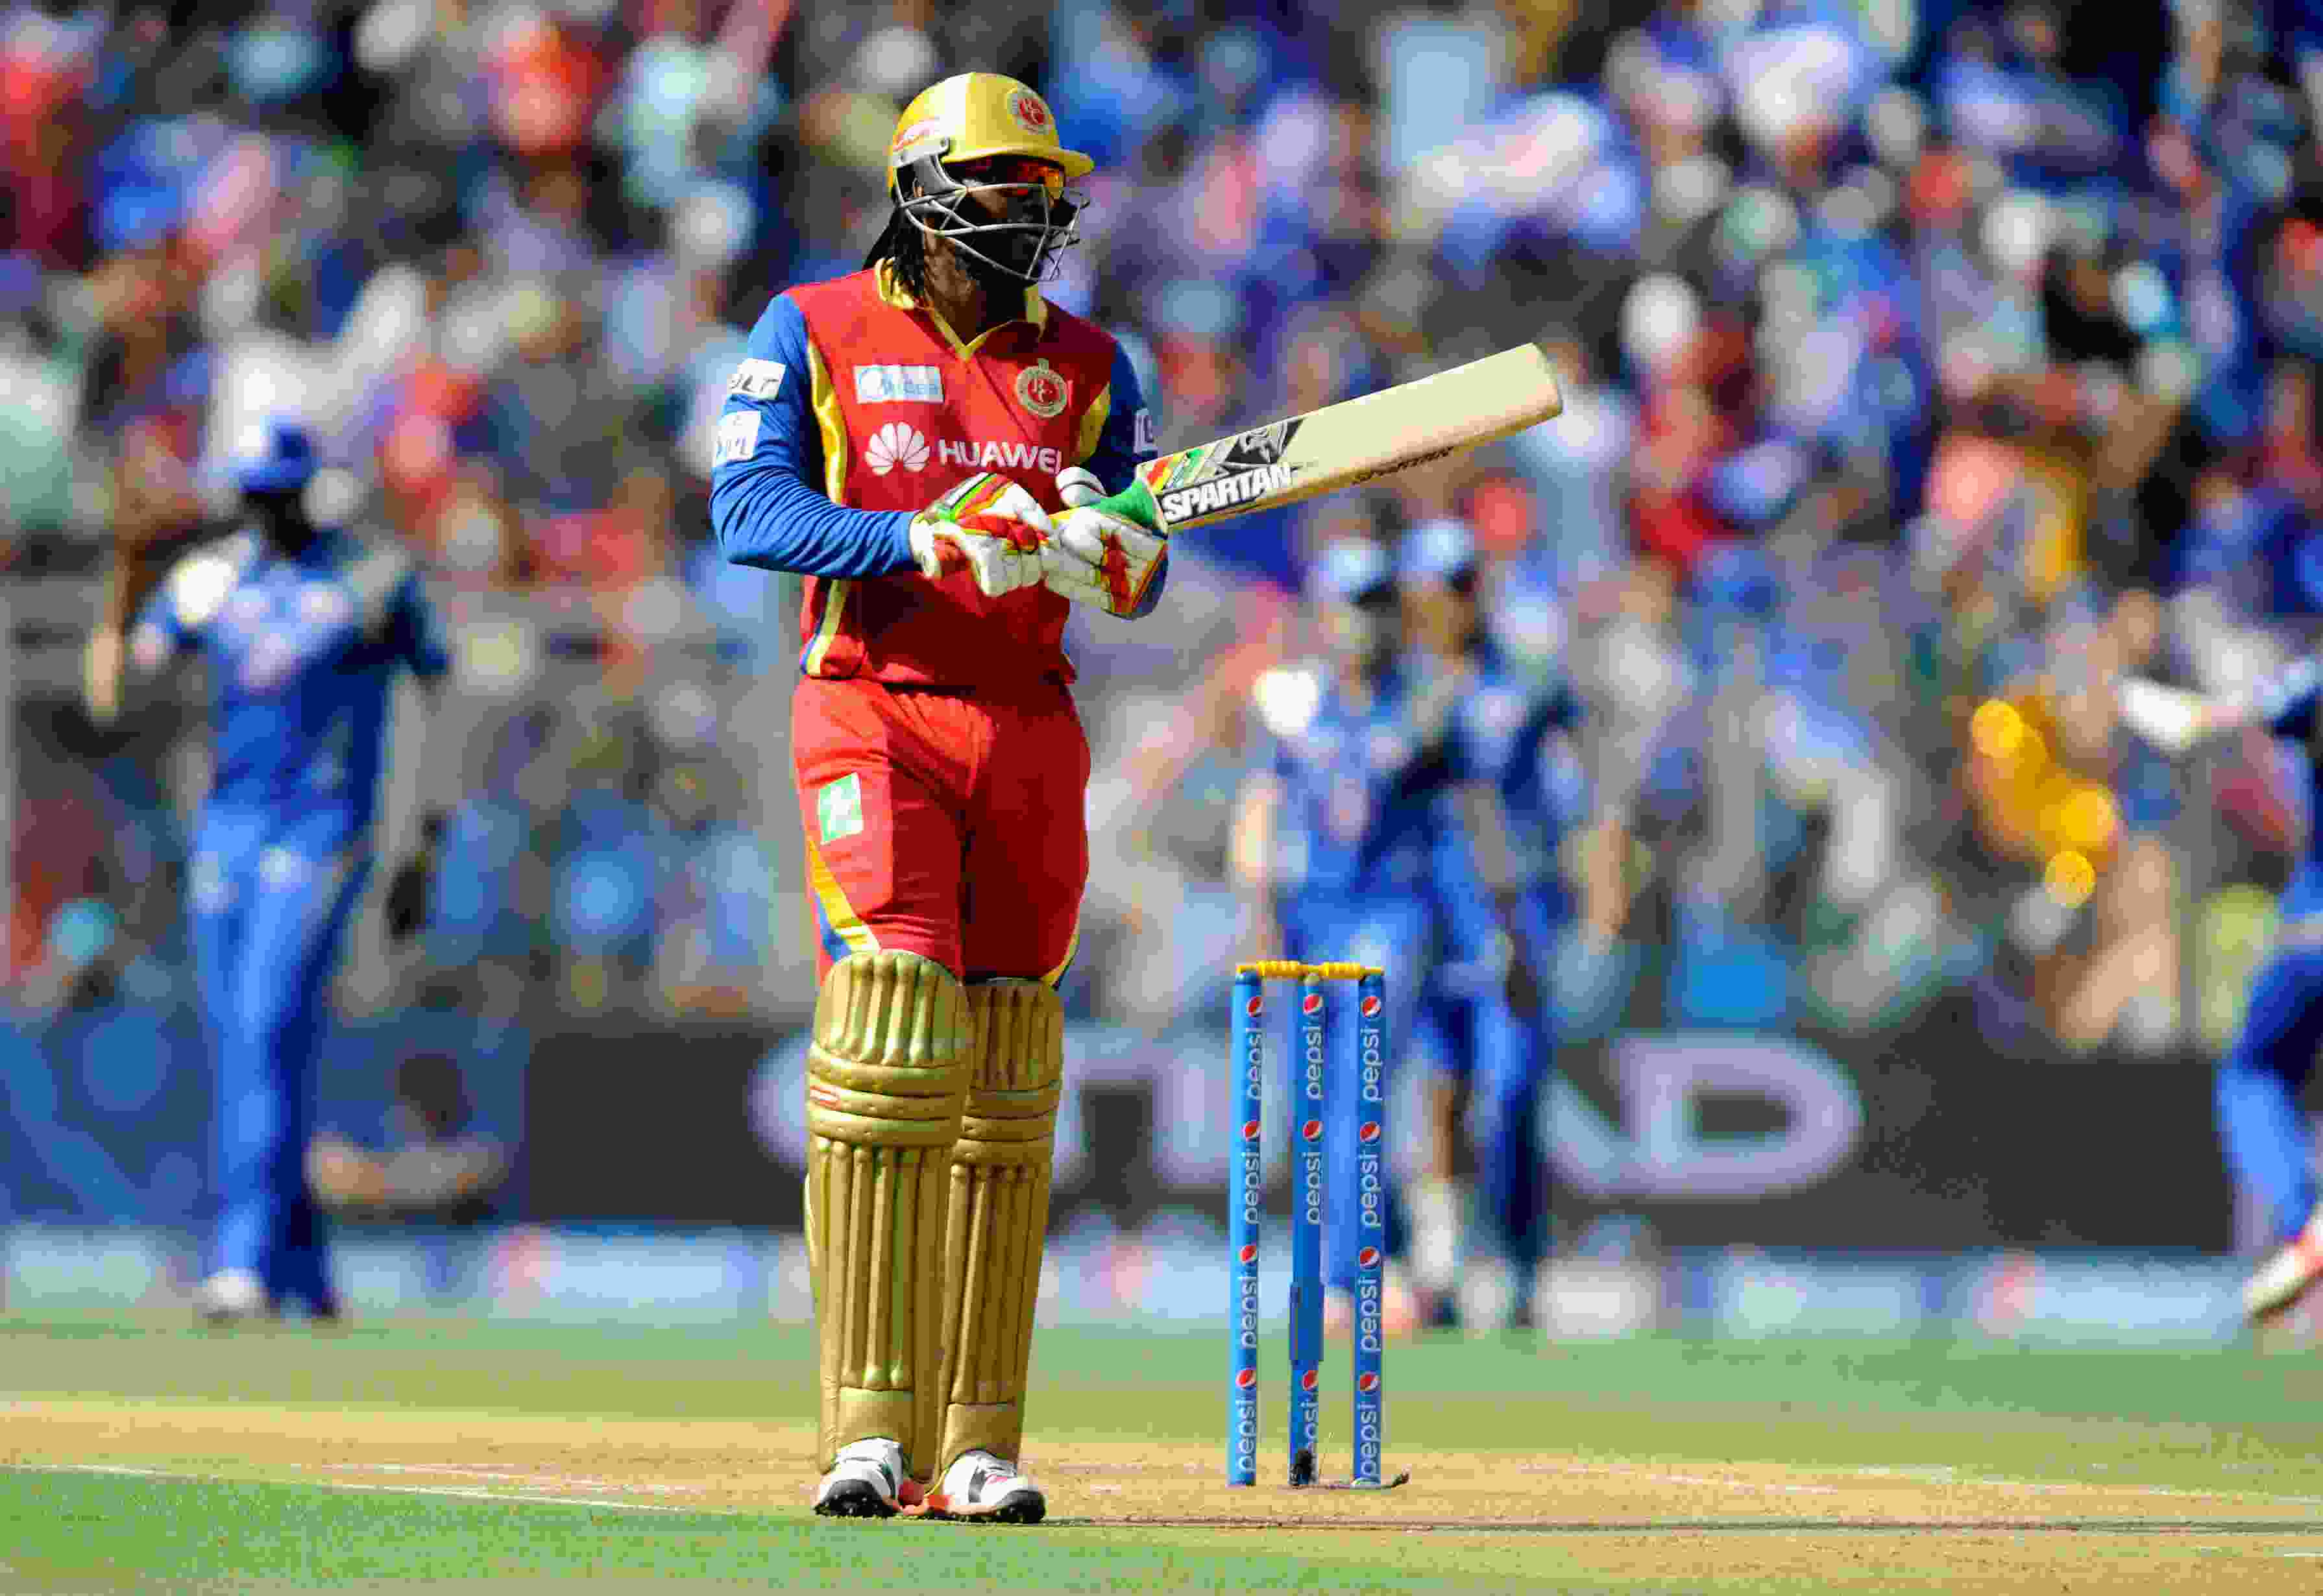 On This Day: Chris Gayle smashed the Fastest Century in cricket history during IPL 2013